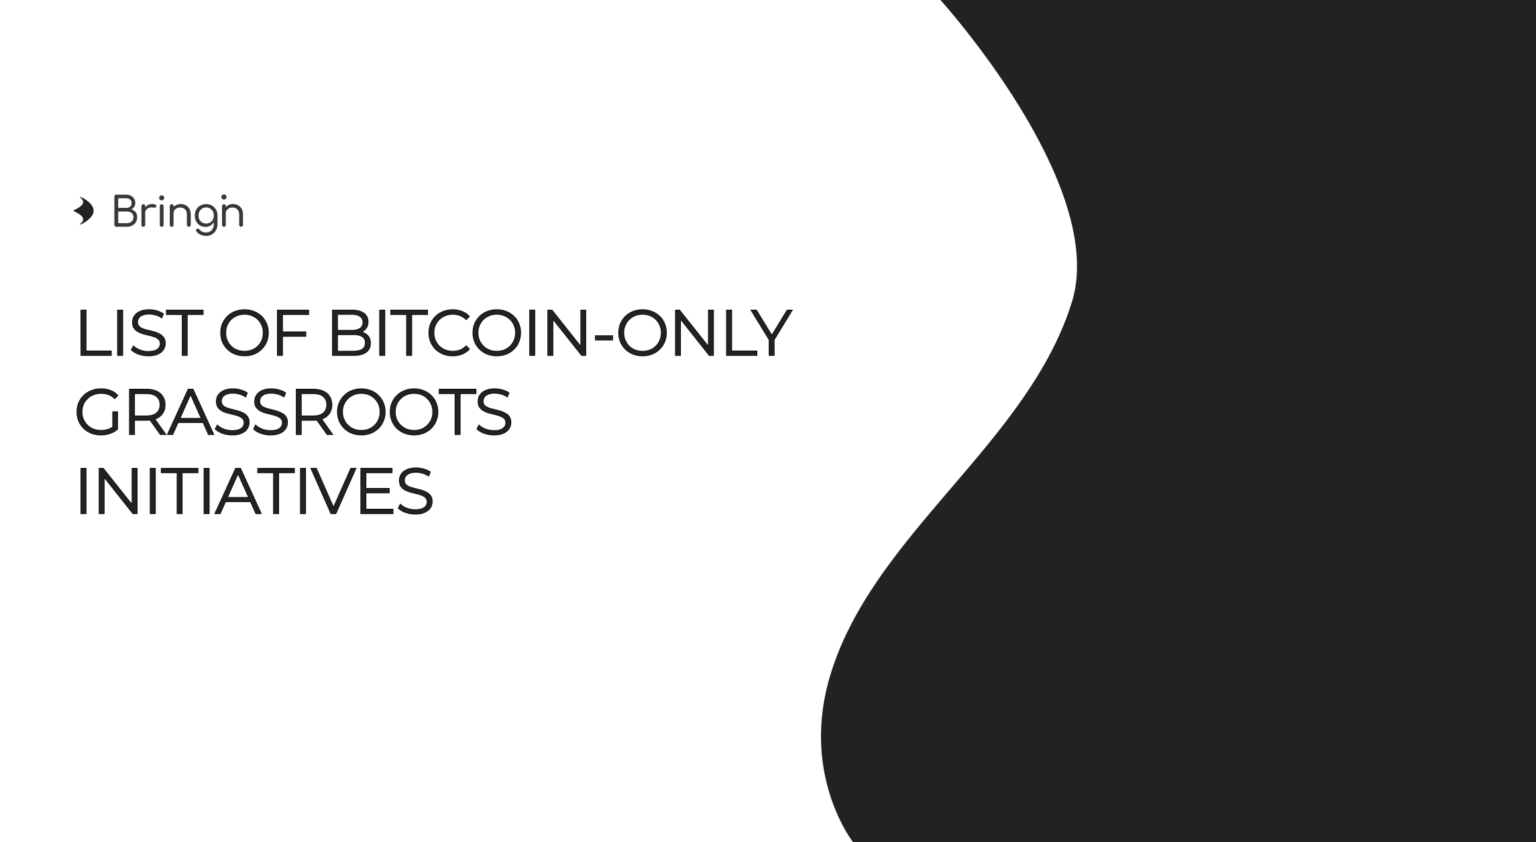 A Curated List of 150 Bitcoin-only Grassroots Initiatives